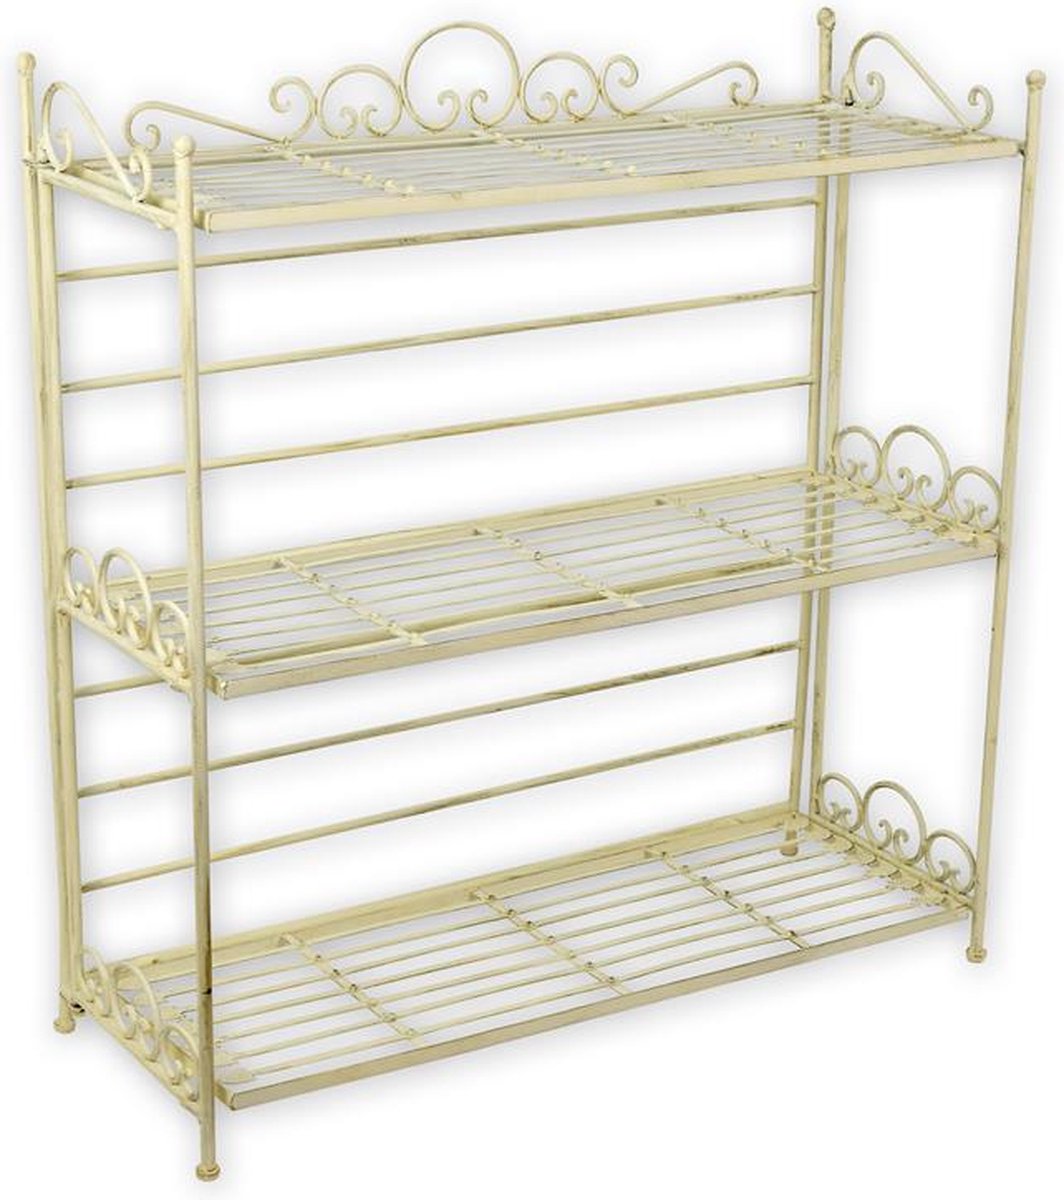 EEN 3 LAAGS IJZER ETAGERE, WIT, A 3 TIER IRON ETAGERE, WHITE